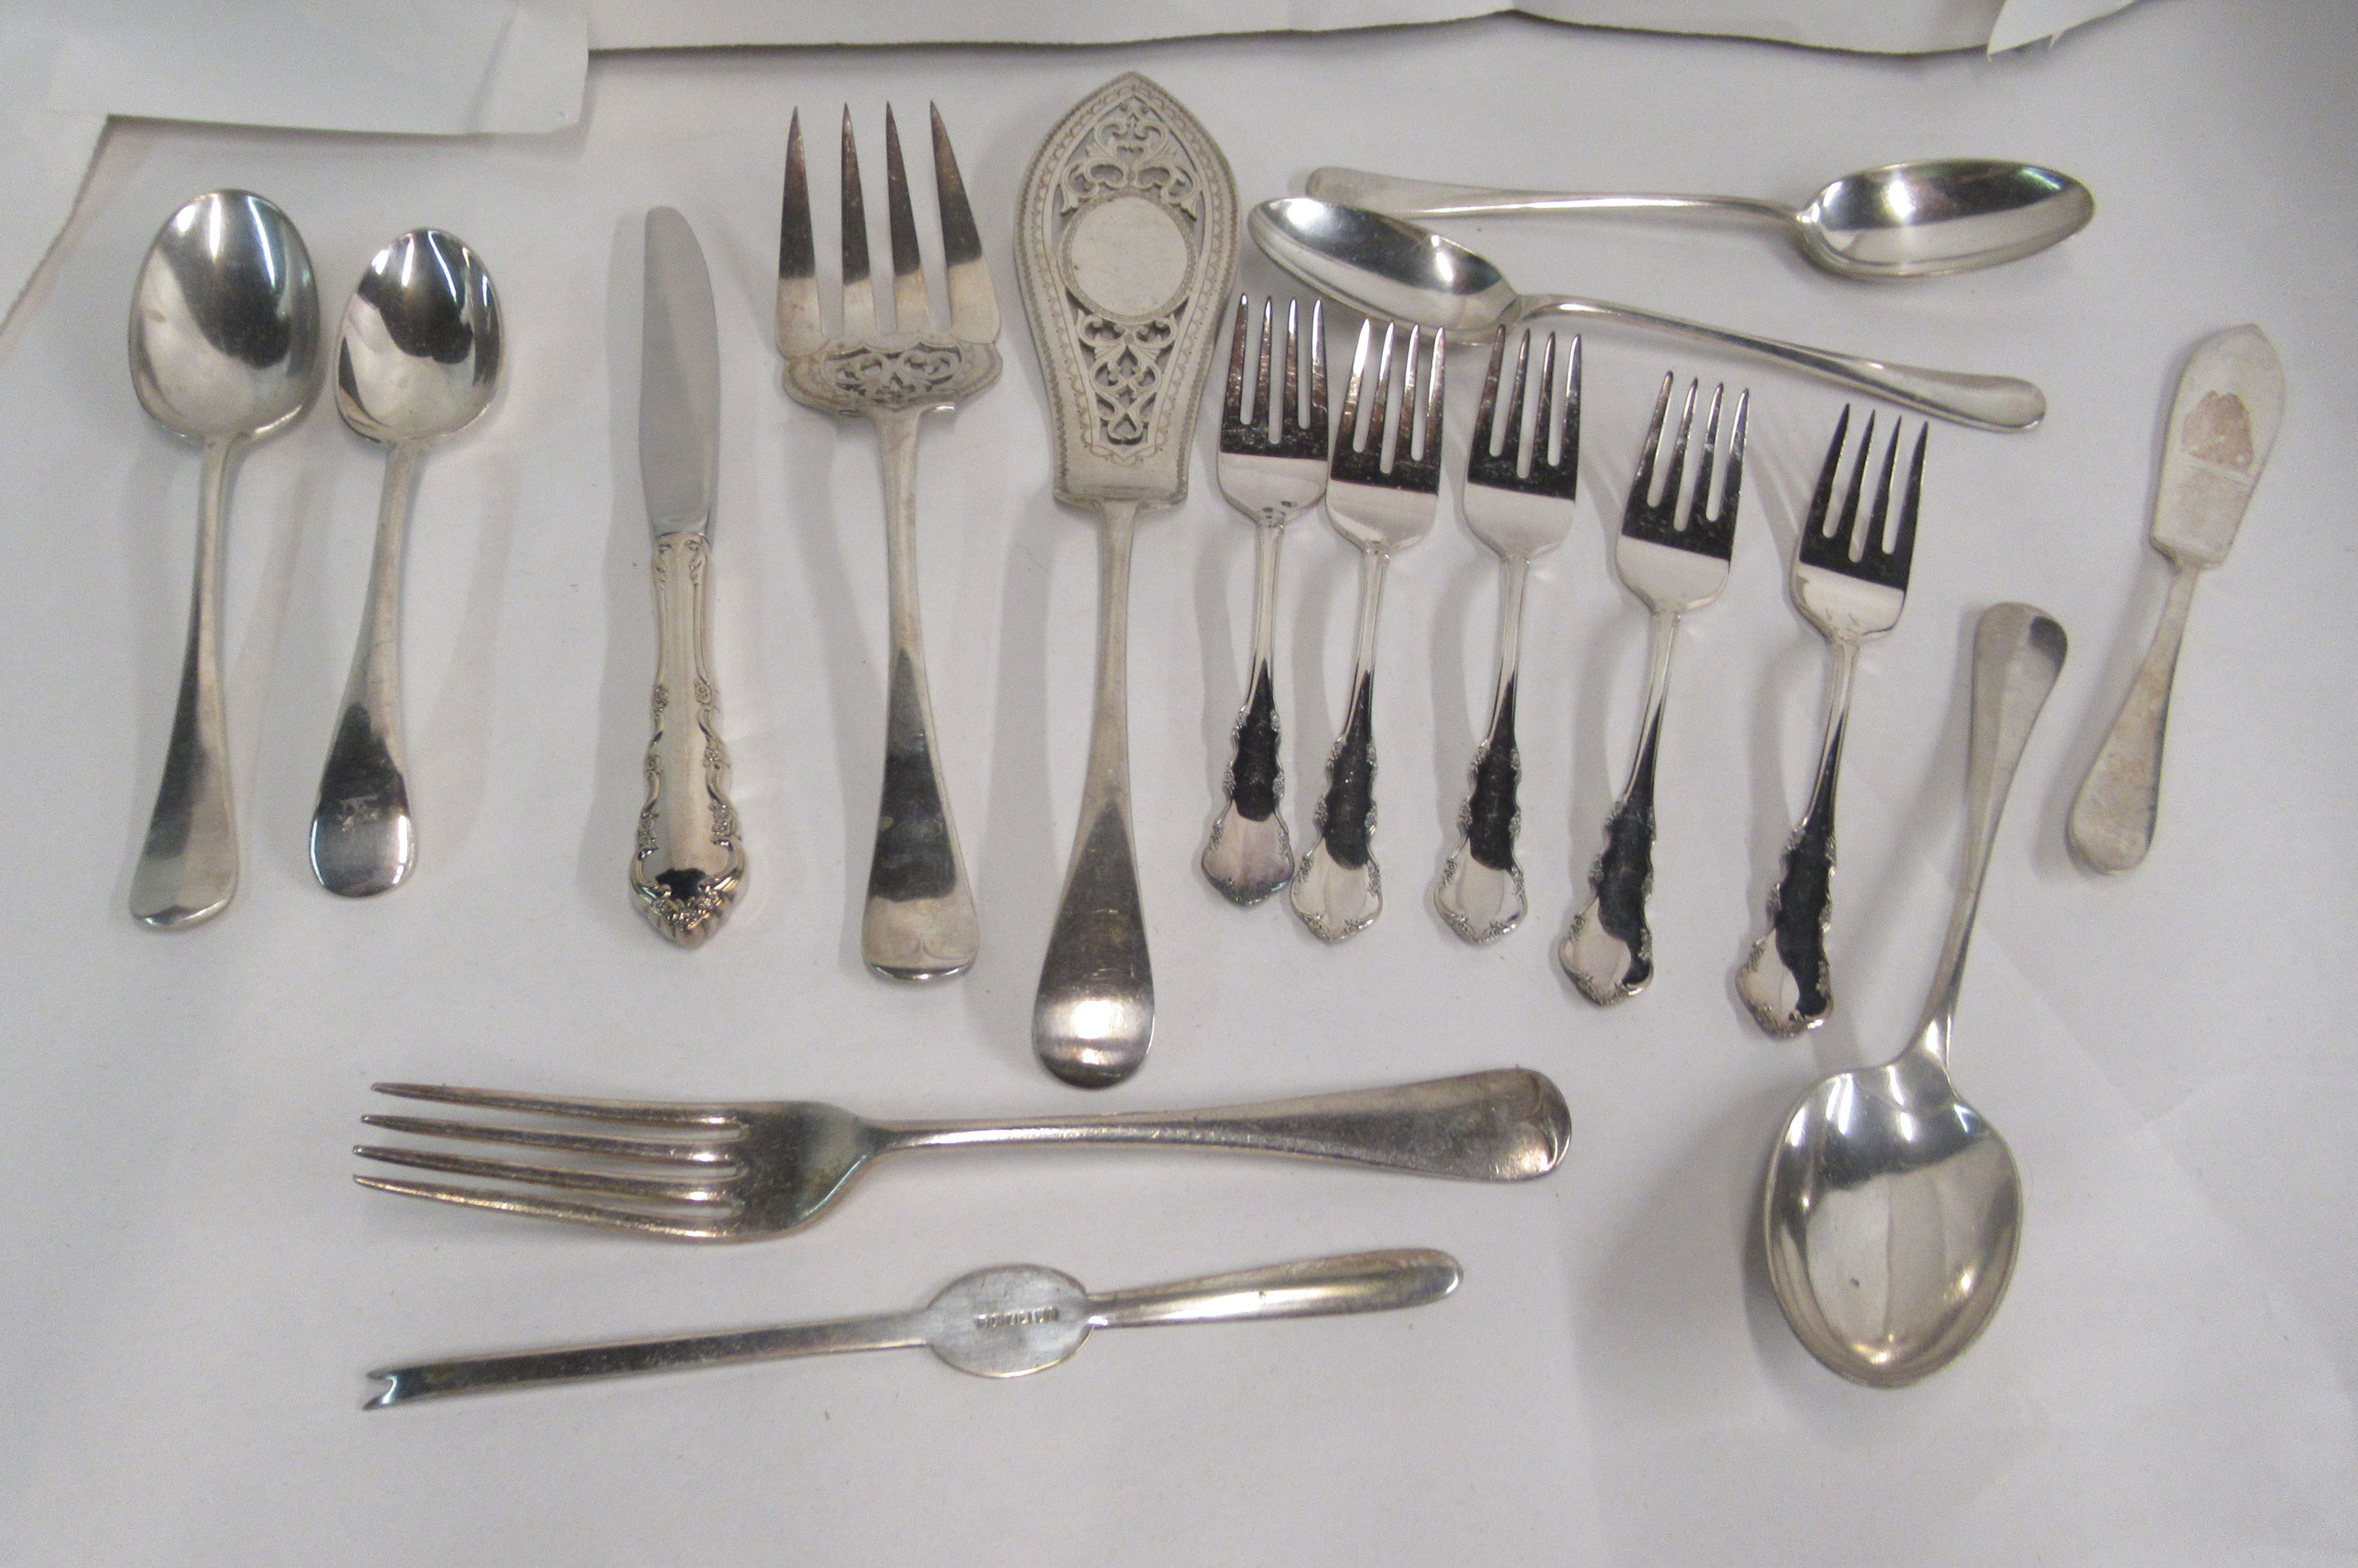 Variously patterned Mappin & Webb and other EPNS cutlery and flatware - Image 4 of 4